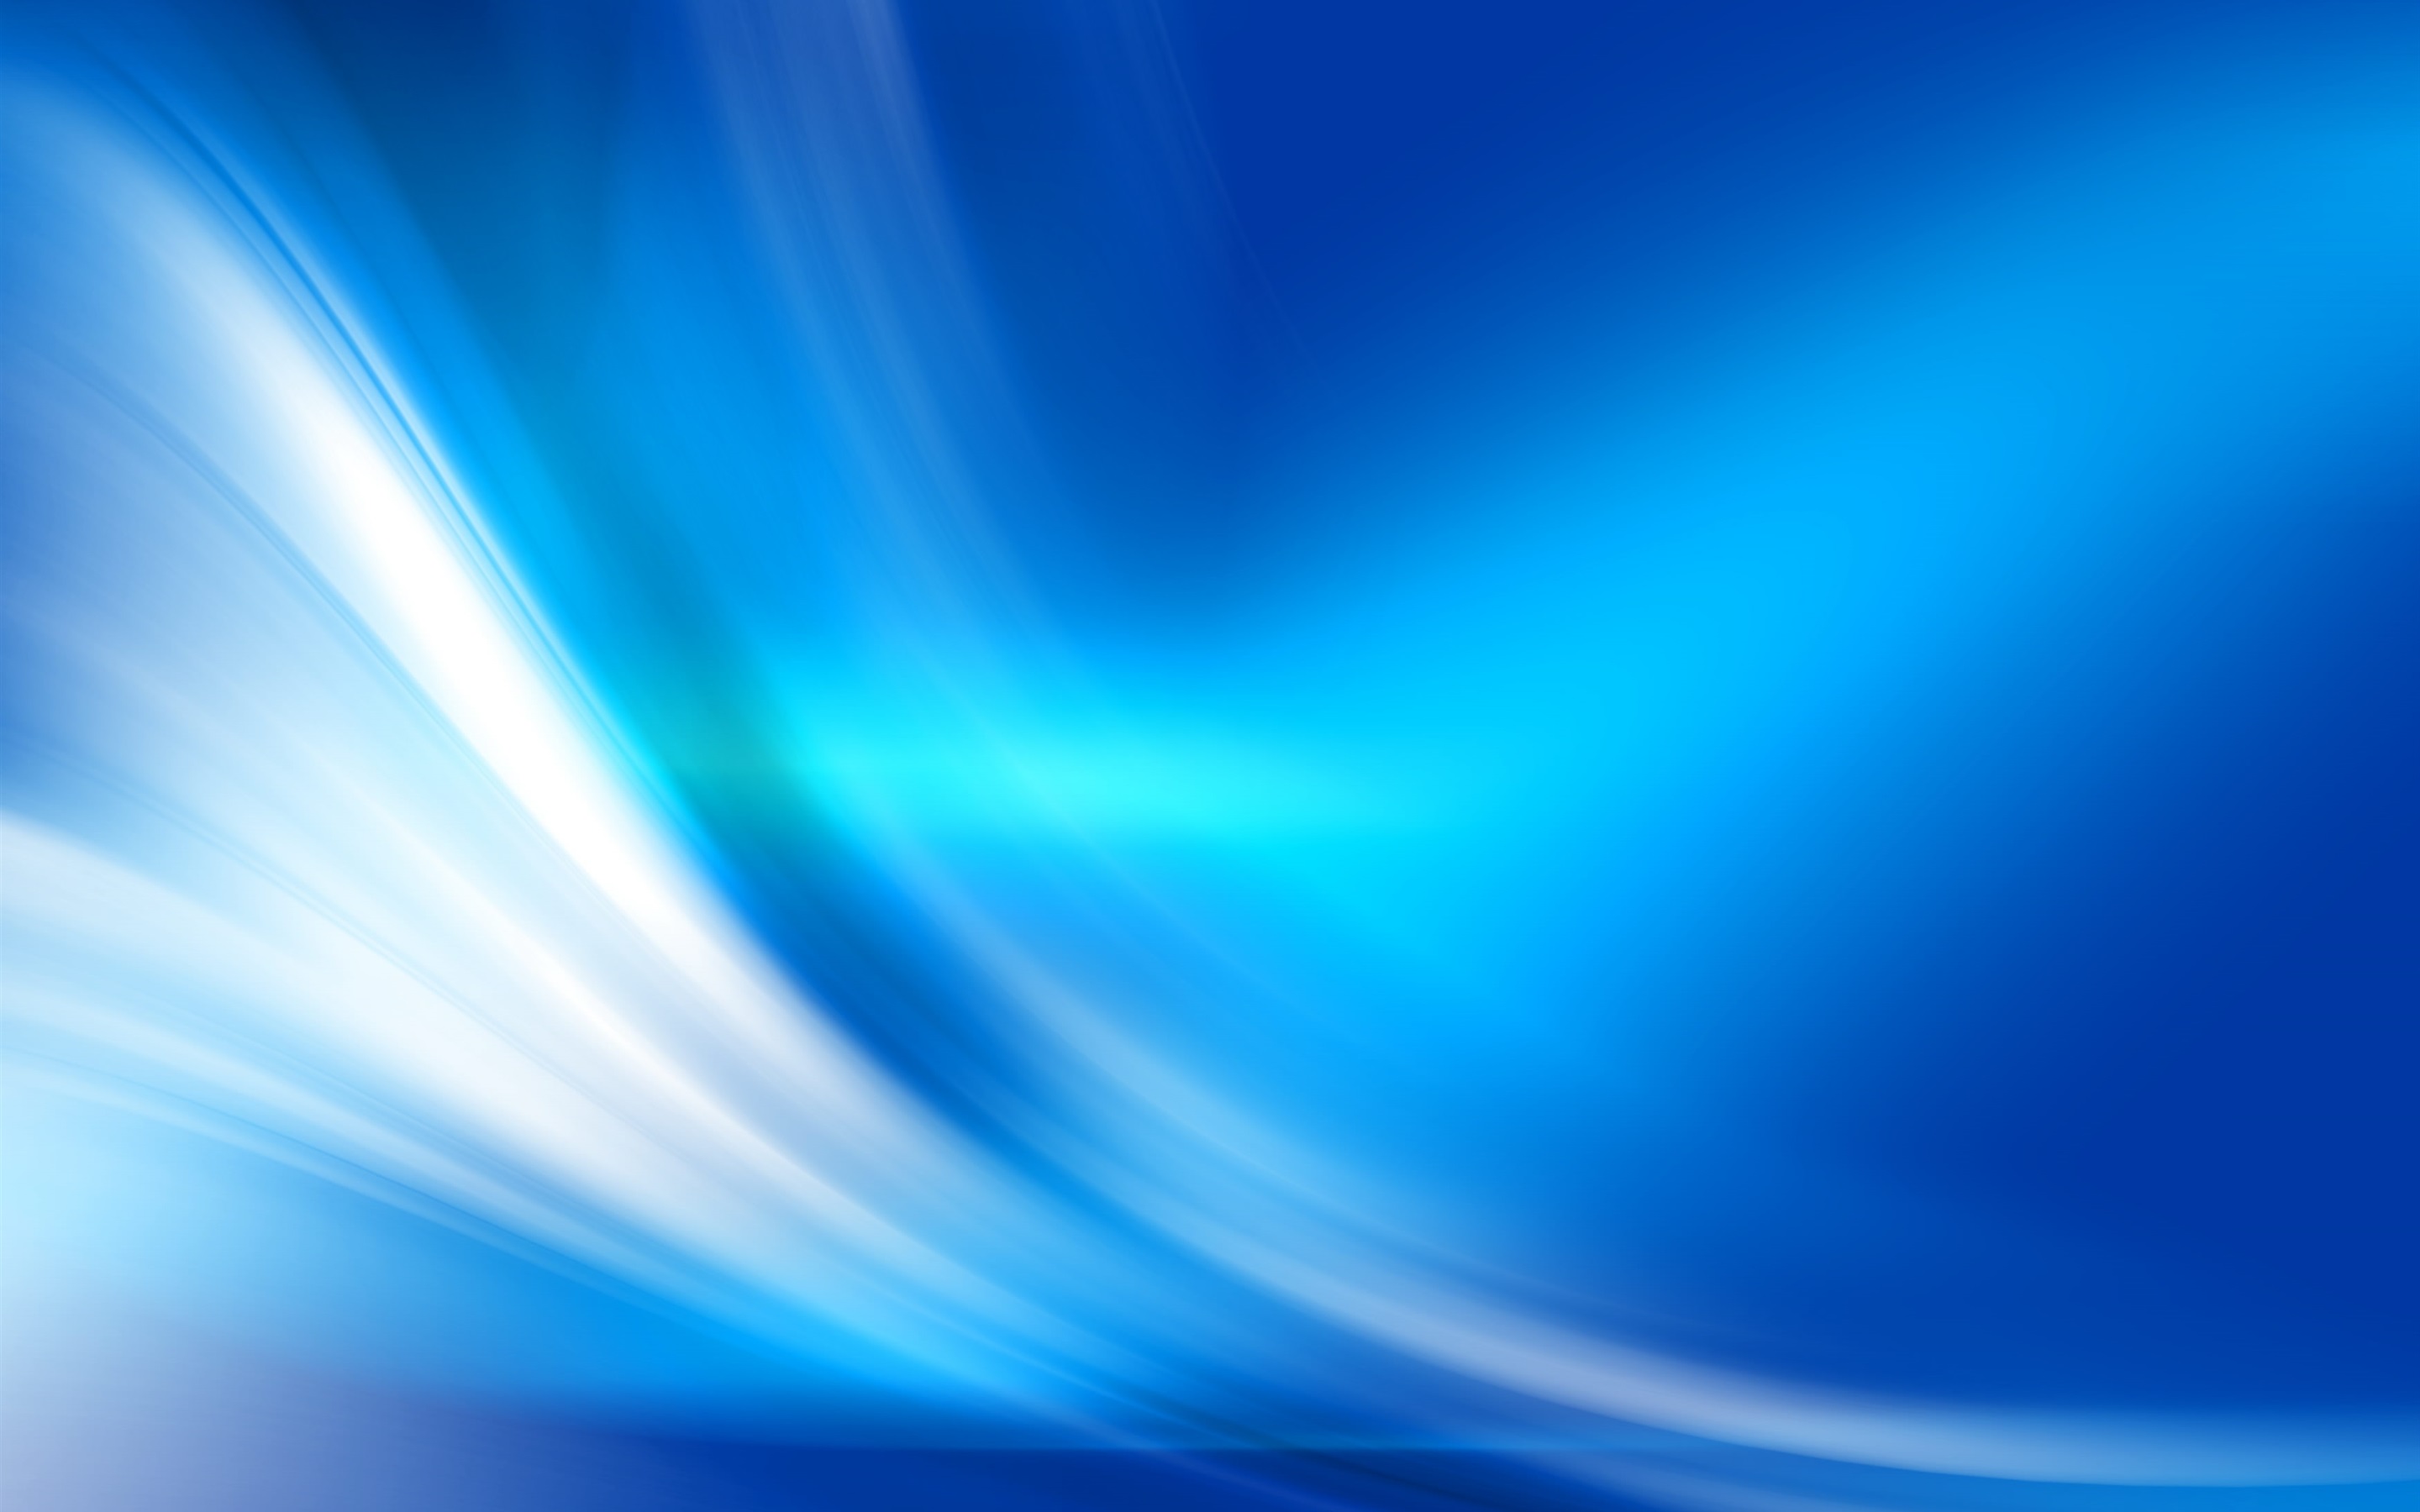 Wallpaper Blue Curves, Abstract Background - Windows 10 Background Wave - HD Wallpaper 